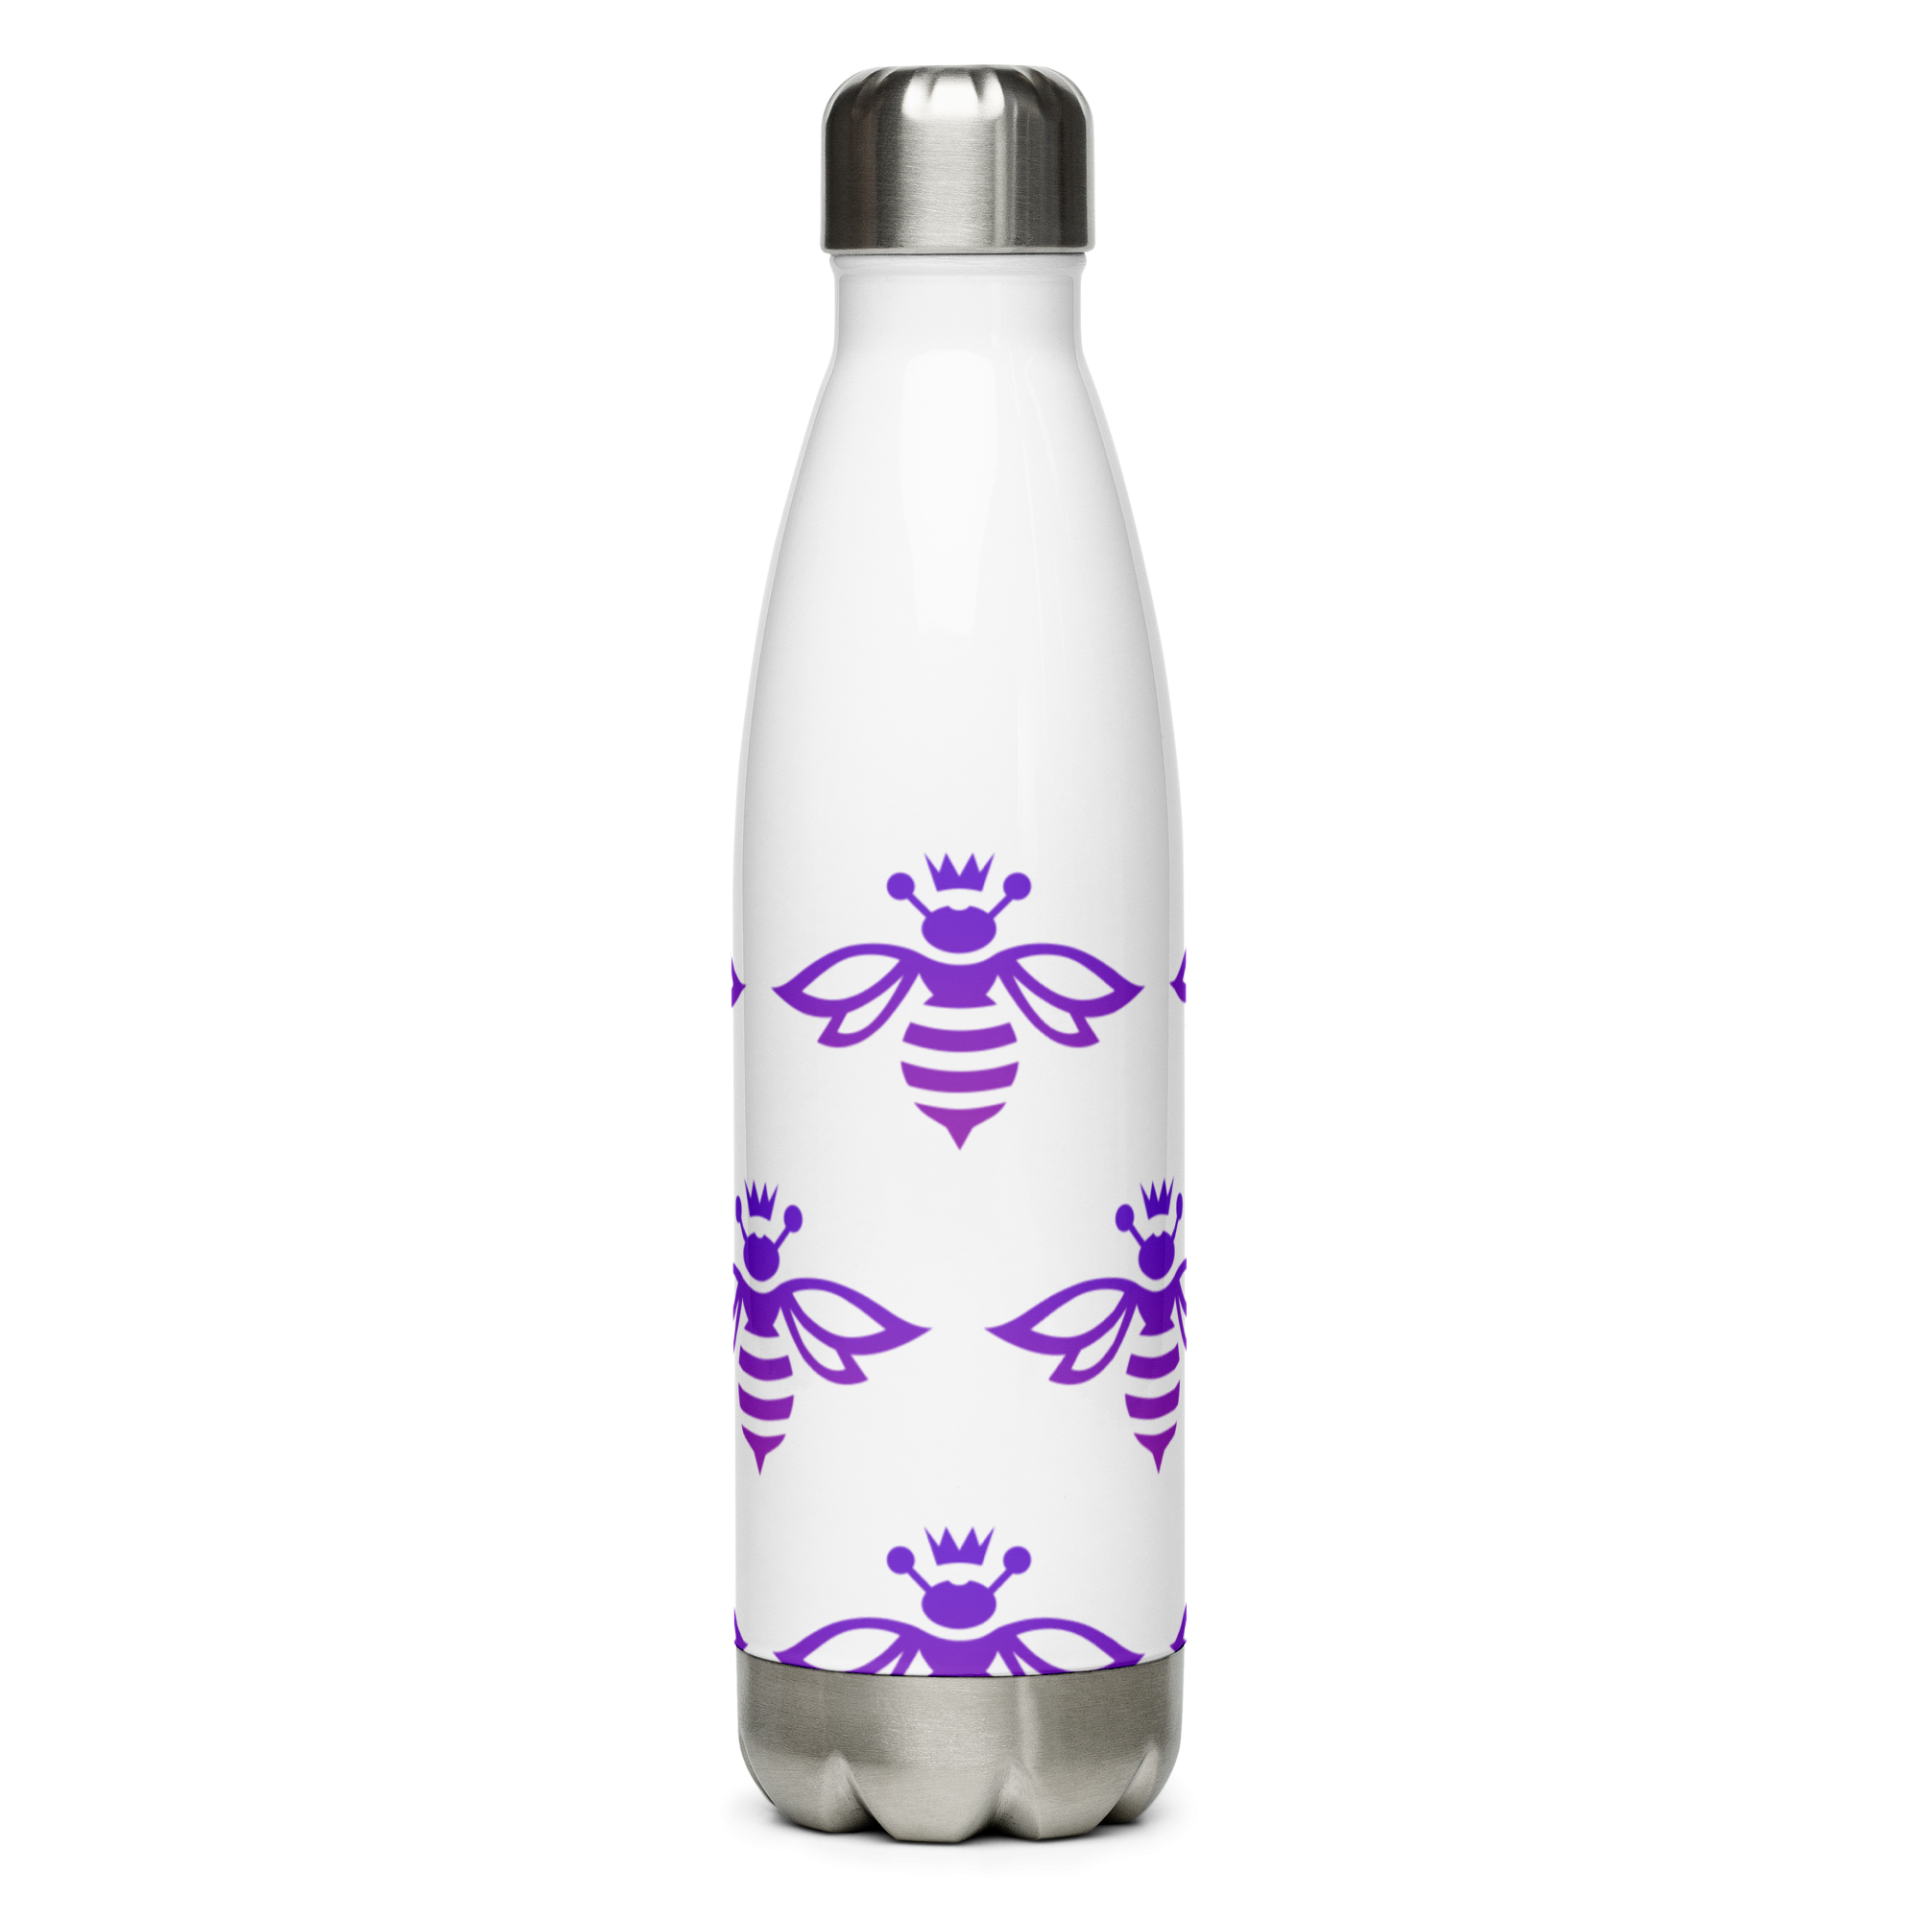 https://purplebee.org/wp-content/uploads/stainless-steel-water-bottle-white-17oz-front-631237b1f40f1-1920x1920.png